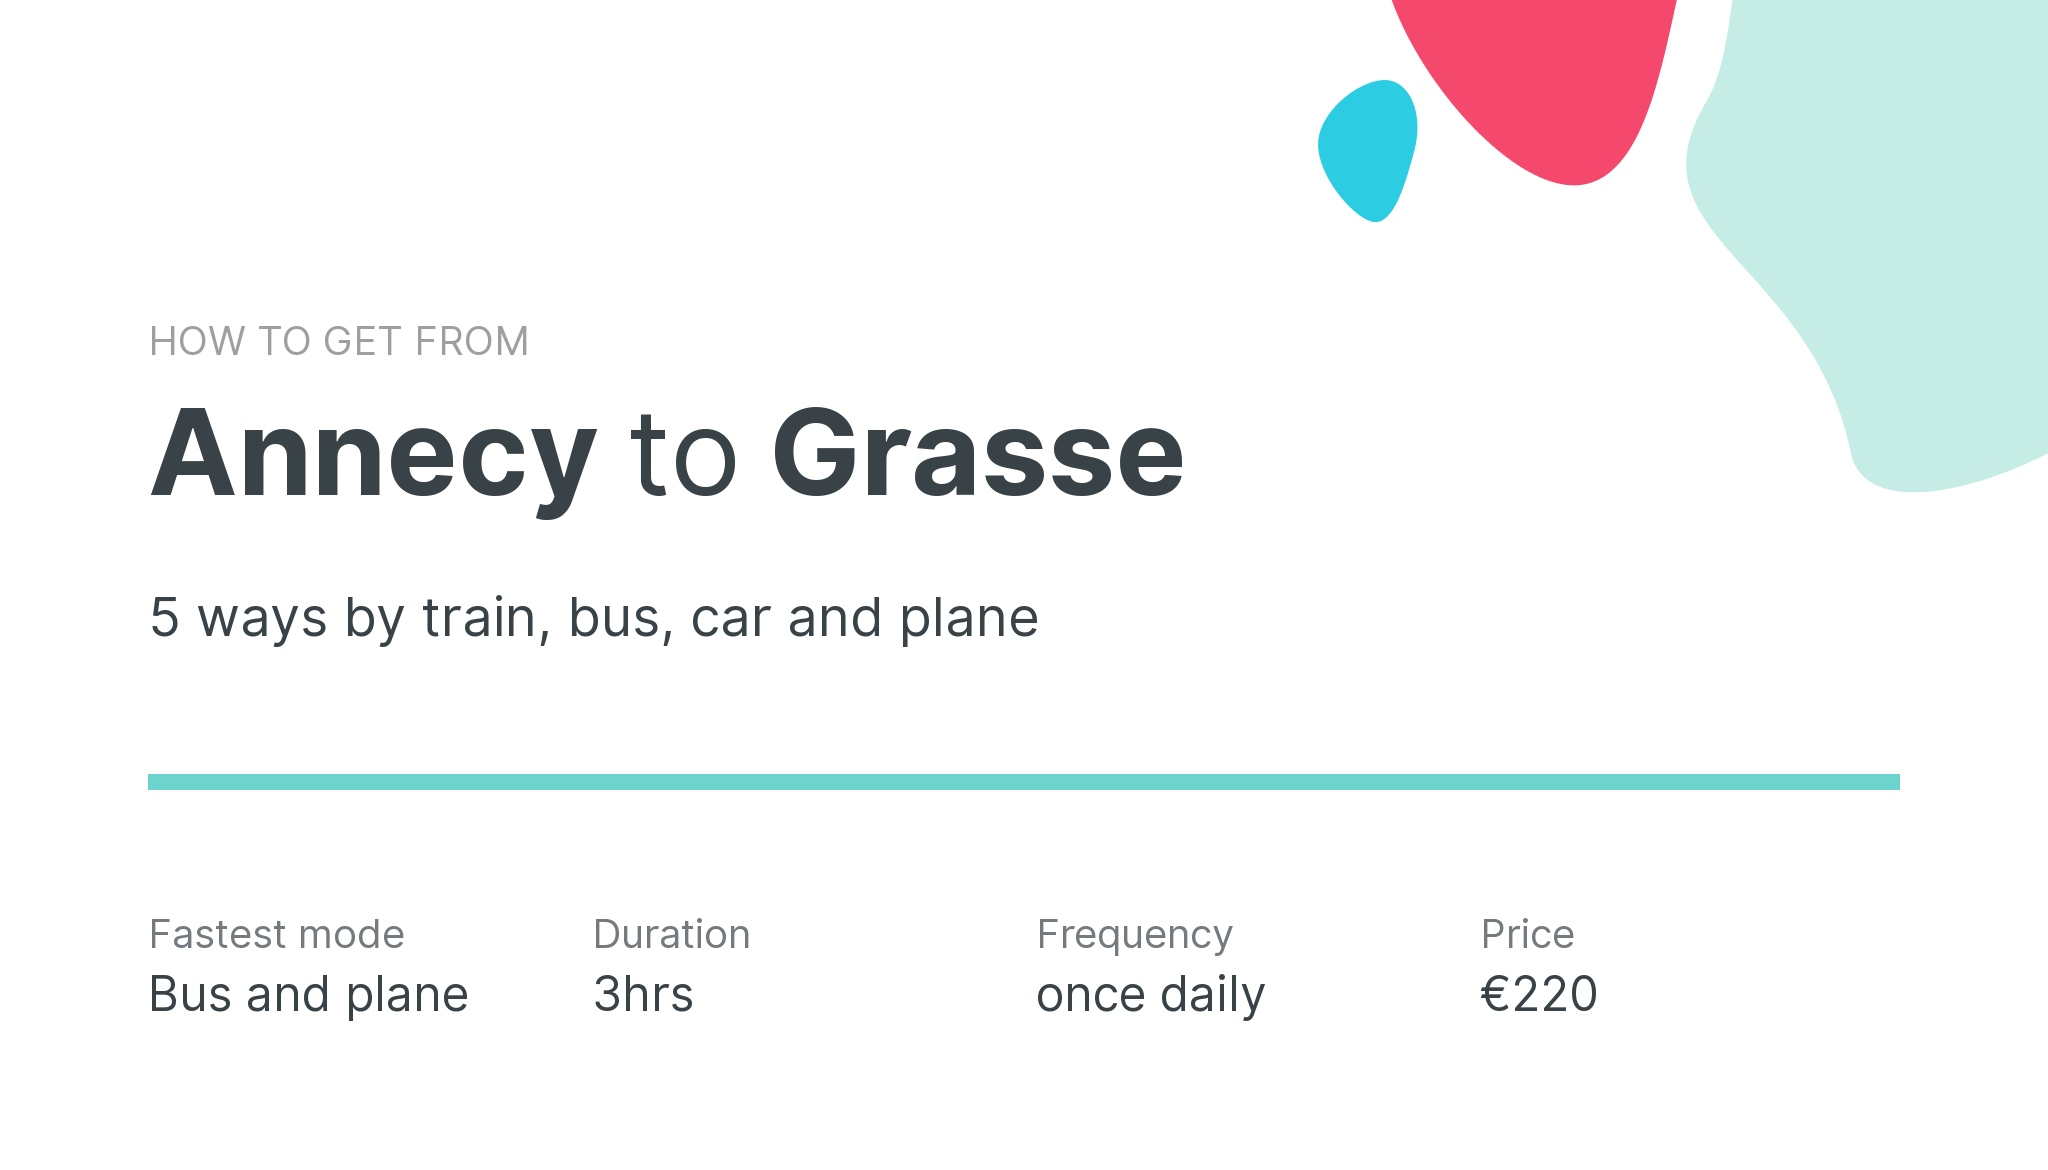 How do I get from Annecy to Grasse